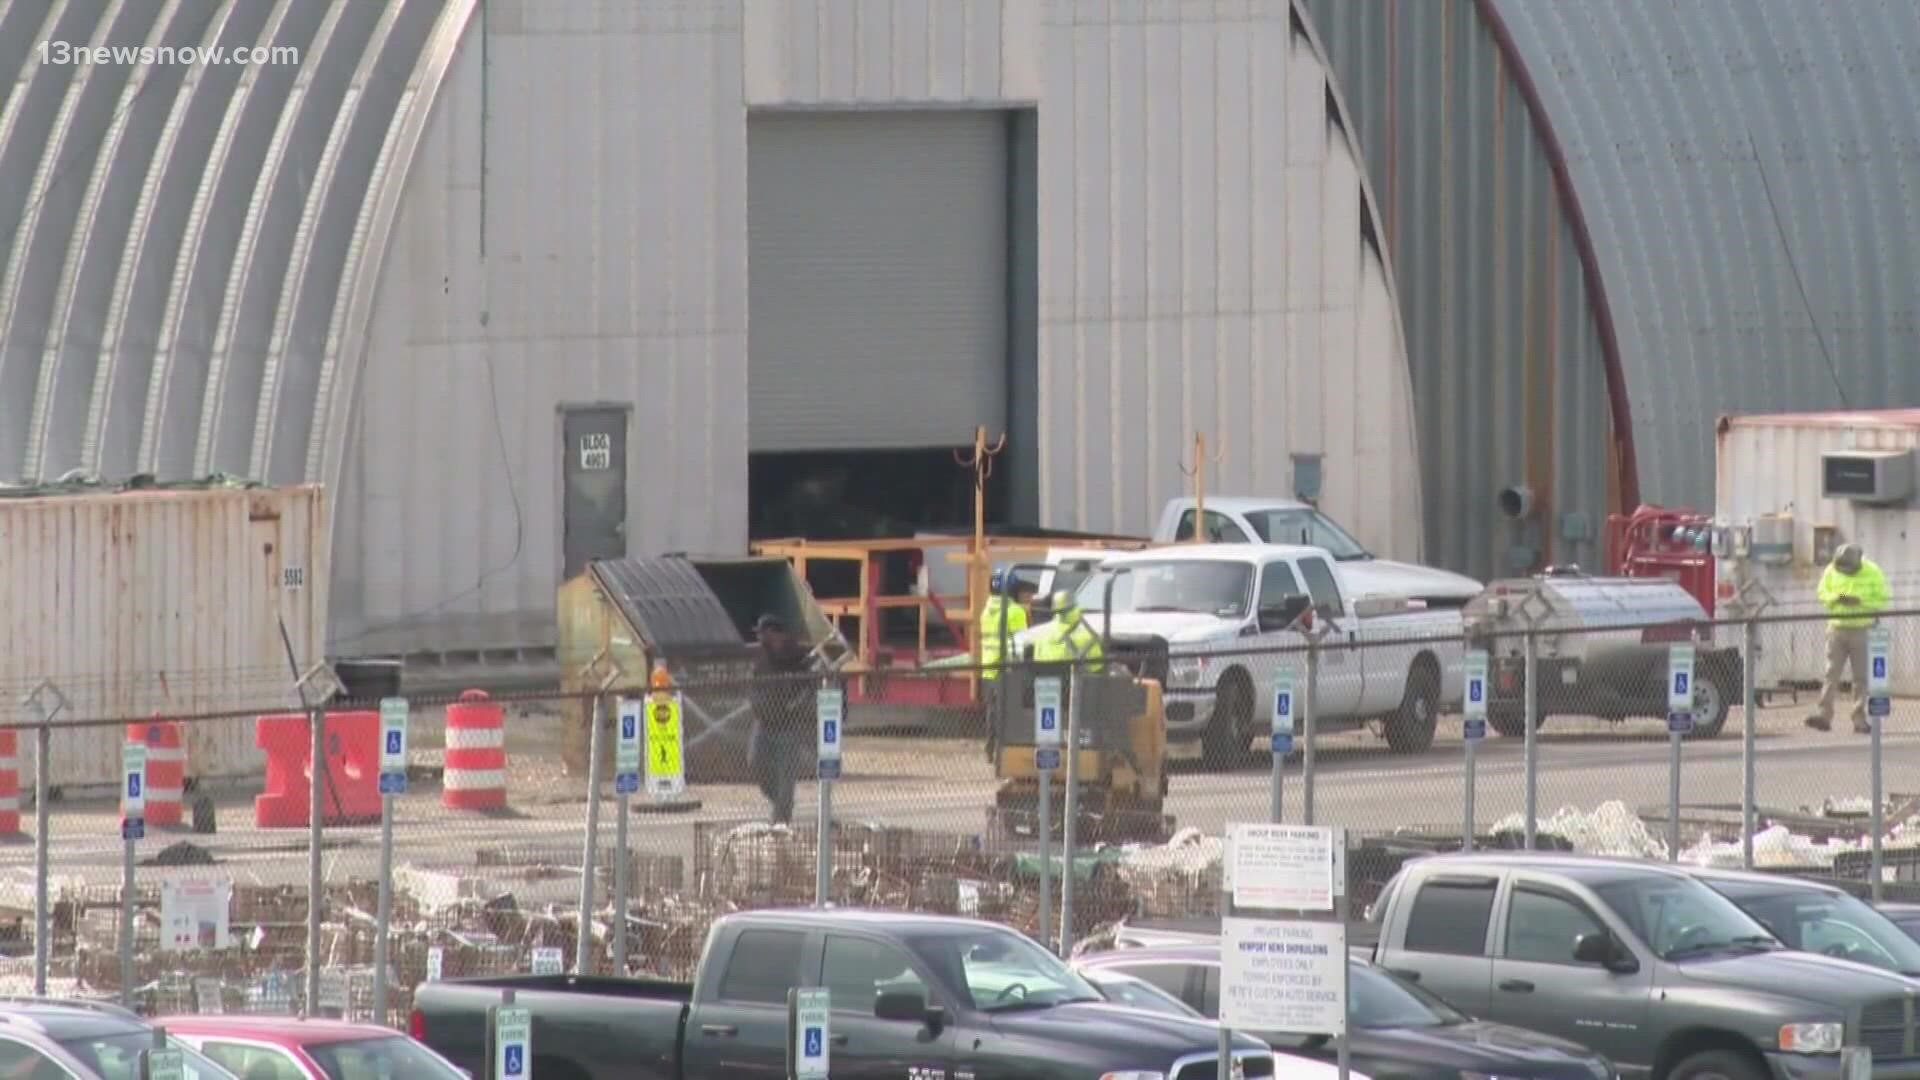 Thousands of Newport News shipyard employees will wait until the after the holiday to learn more about the potential of a new labor deal.